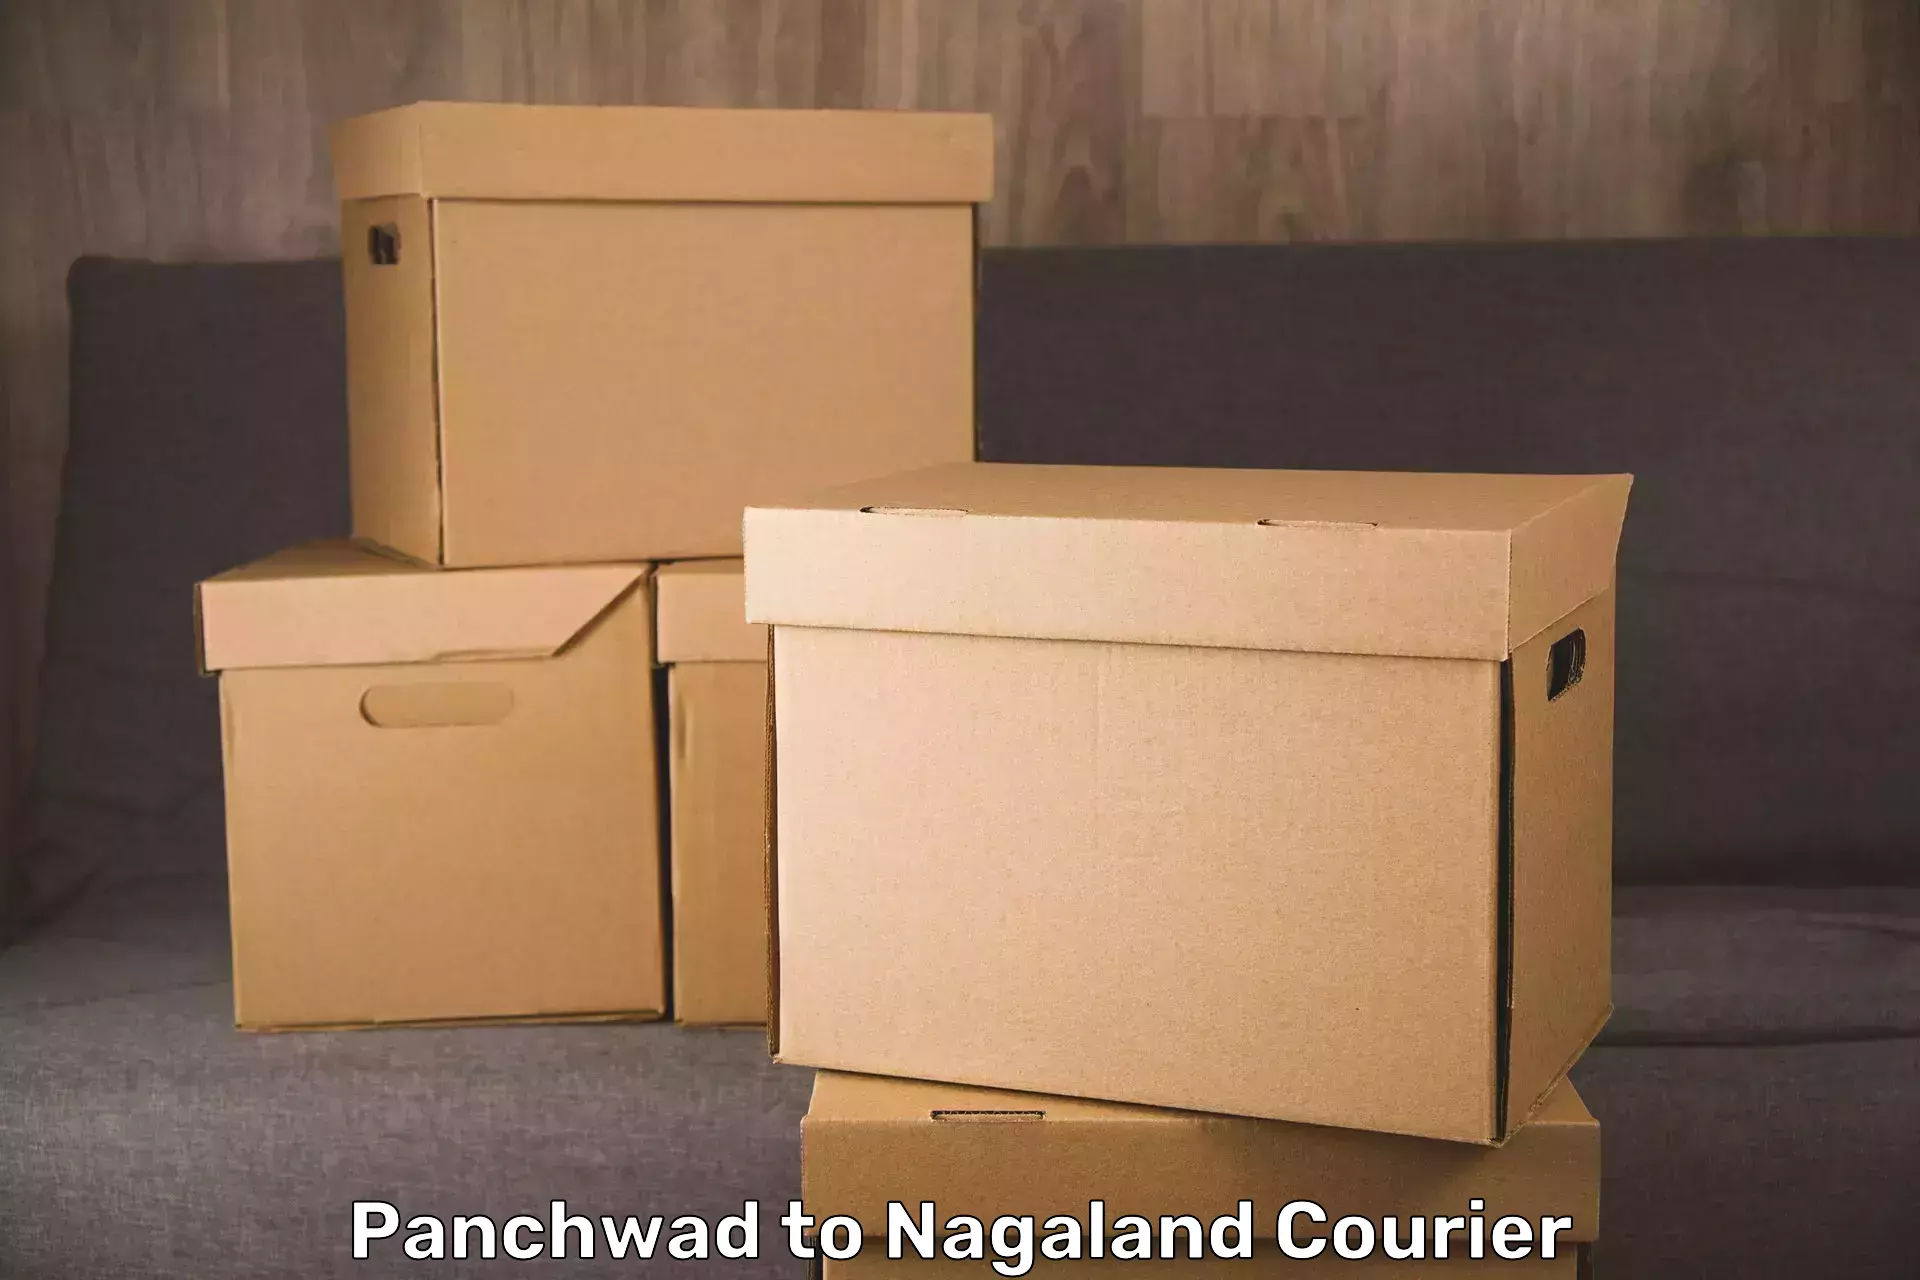 Luggage transport deals Panchwad to Nagaland